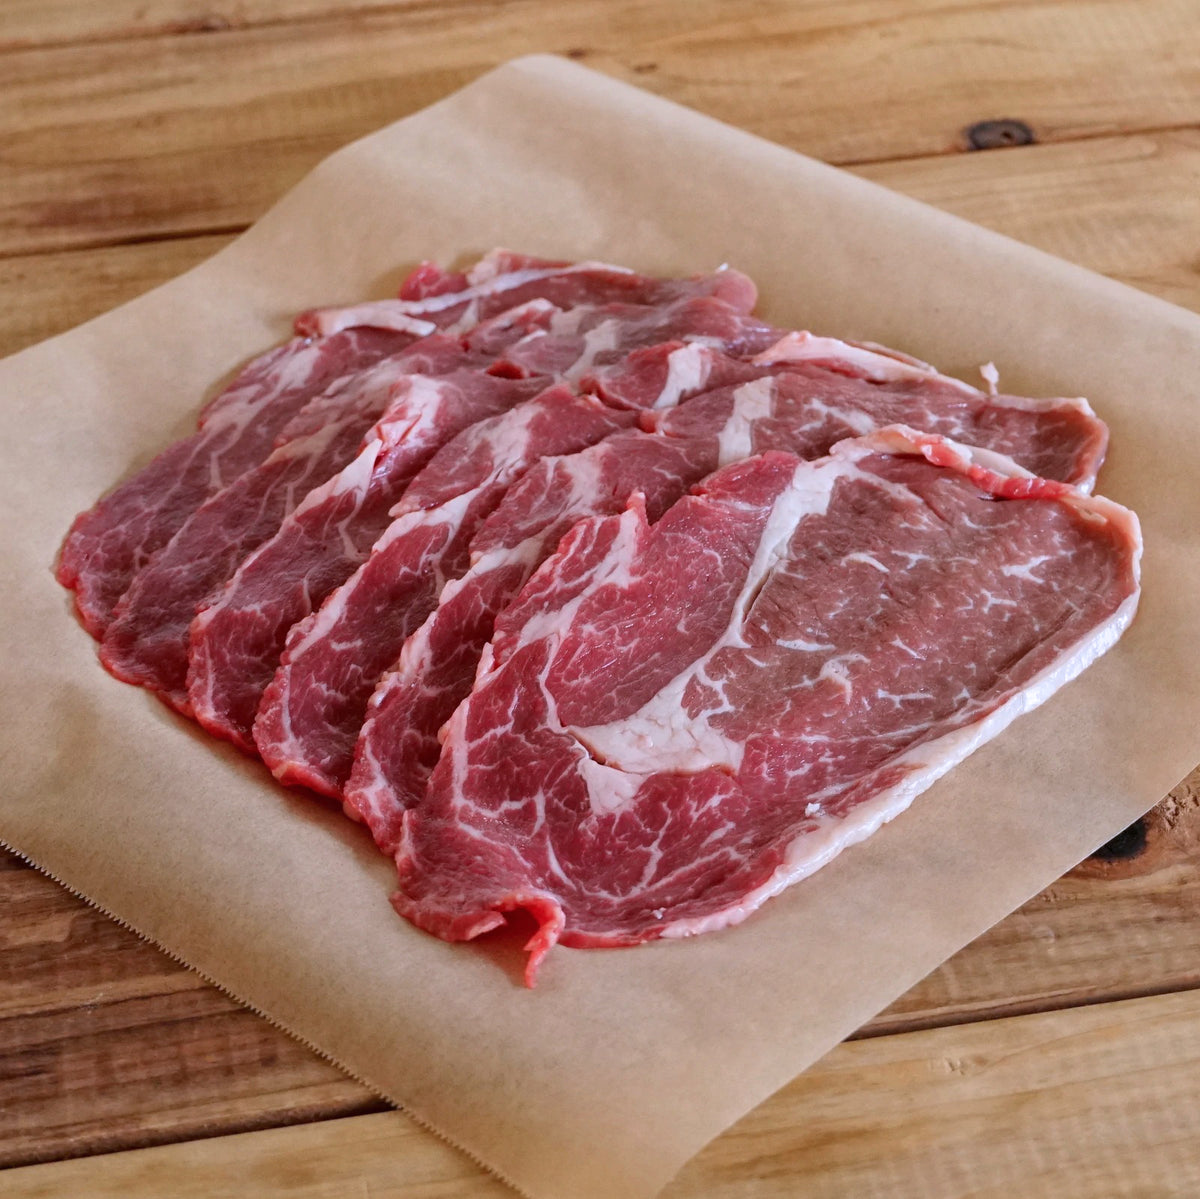 (Limited Sale 15% OFF) Grass-Fed Beef Ribeye Slices (300g) - Horizon Farms